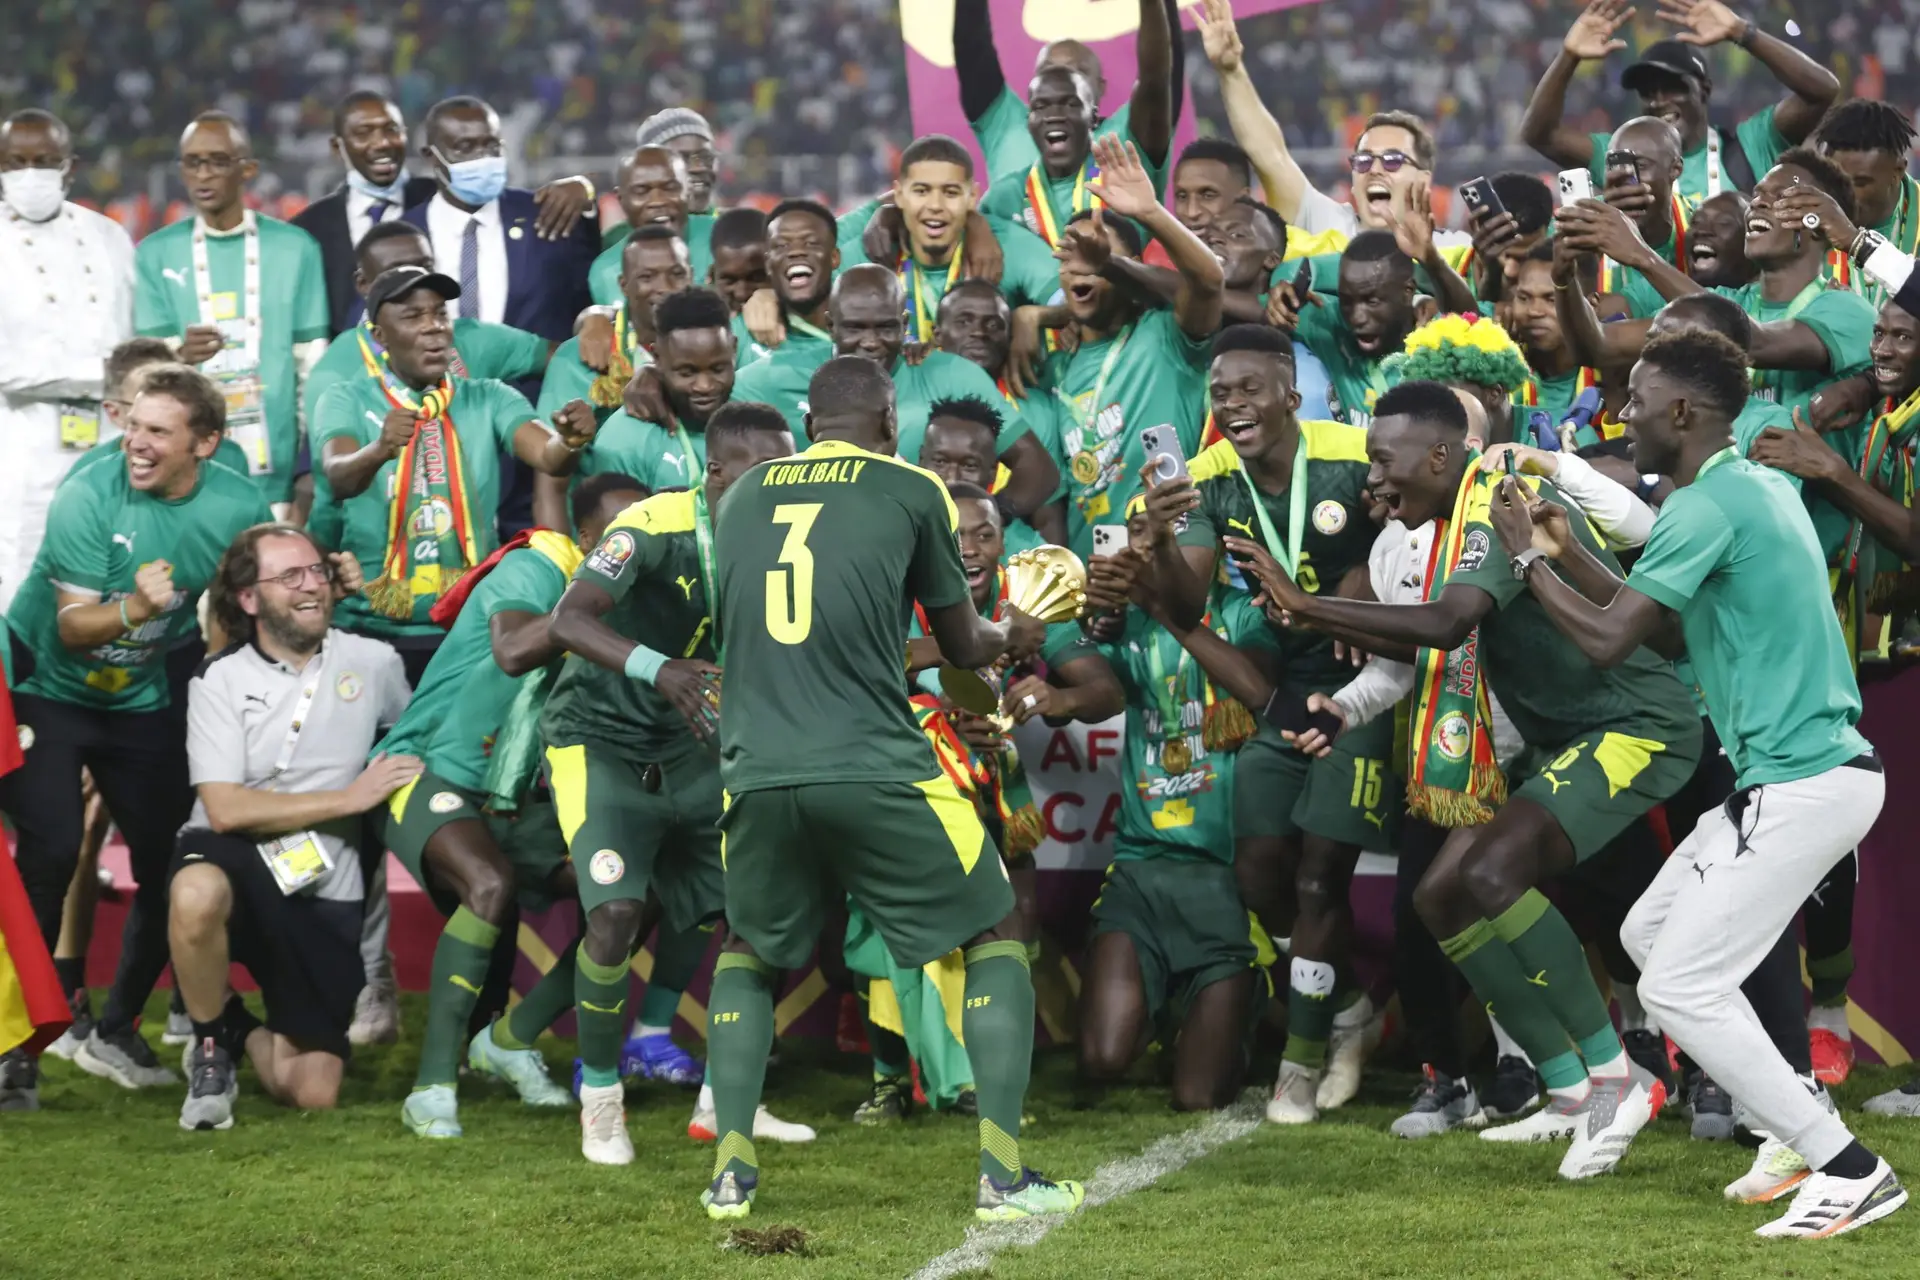 https://images.impresa.pt/sicnot/2022-02-07-senegal-wins-1st-africa-cup-of-nations-beating-egypt-4-2-on-penalties/original